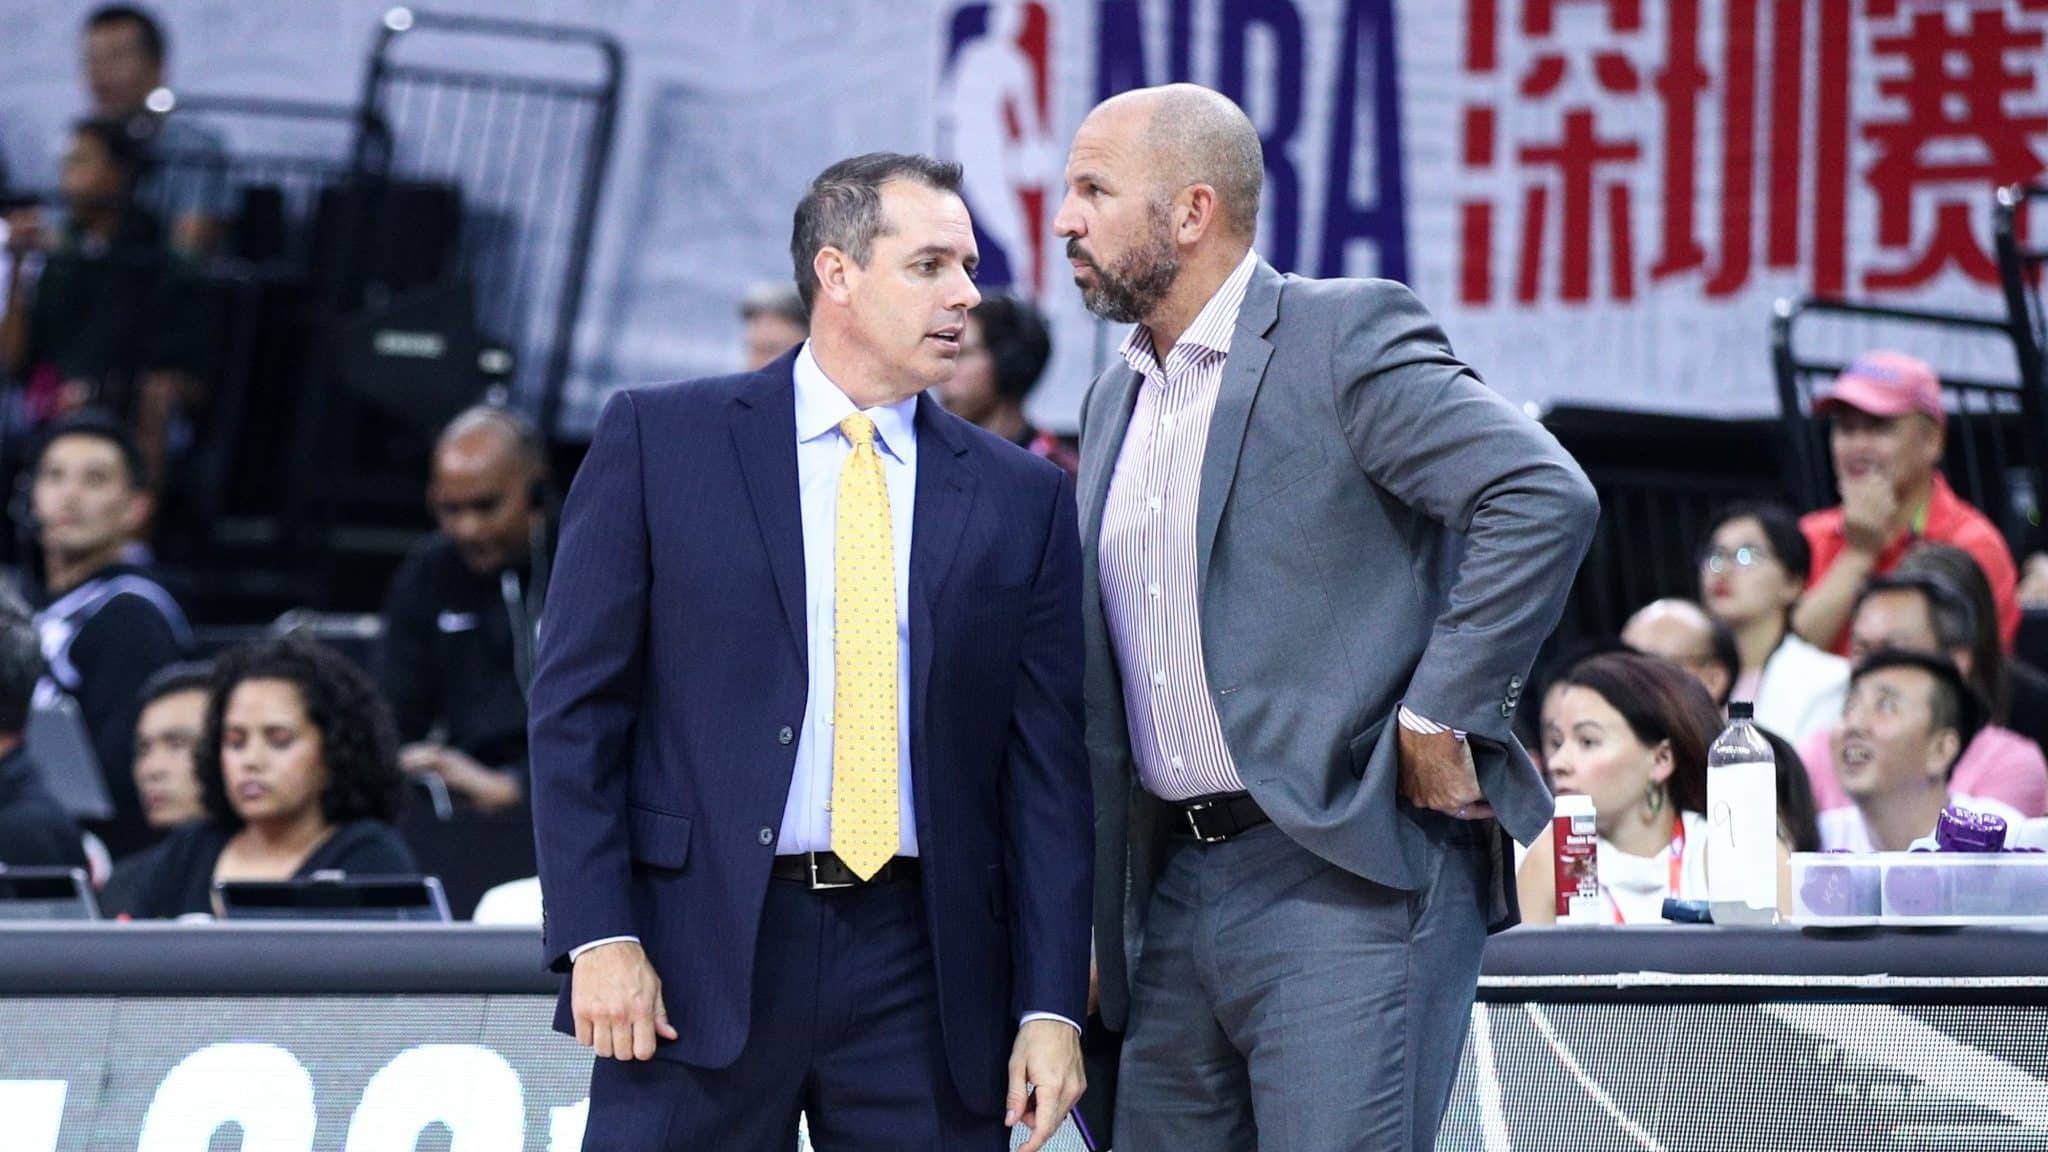 SHENZHEN, CHINA - OCTOBER 12: Head coach Frank Vogel of the Los Angeles Lakers speaks to assistant coach Jason Kidd during the match against the Brooklyn Nets during a preseason game as part of 2019 NBA Global Games China at Shenzhen Universiade Center on October 12, 2019 in Shenzhen, Guangdong, China.